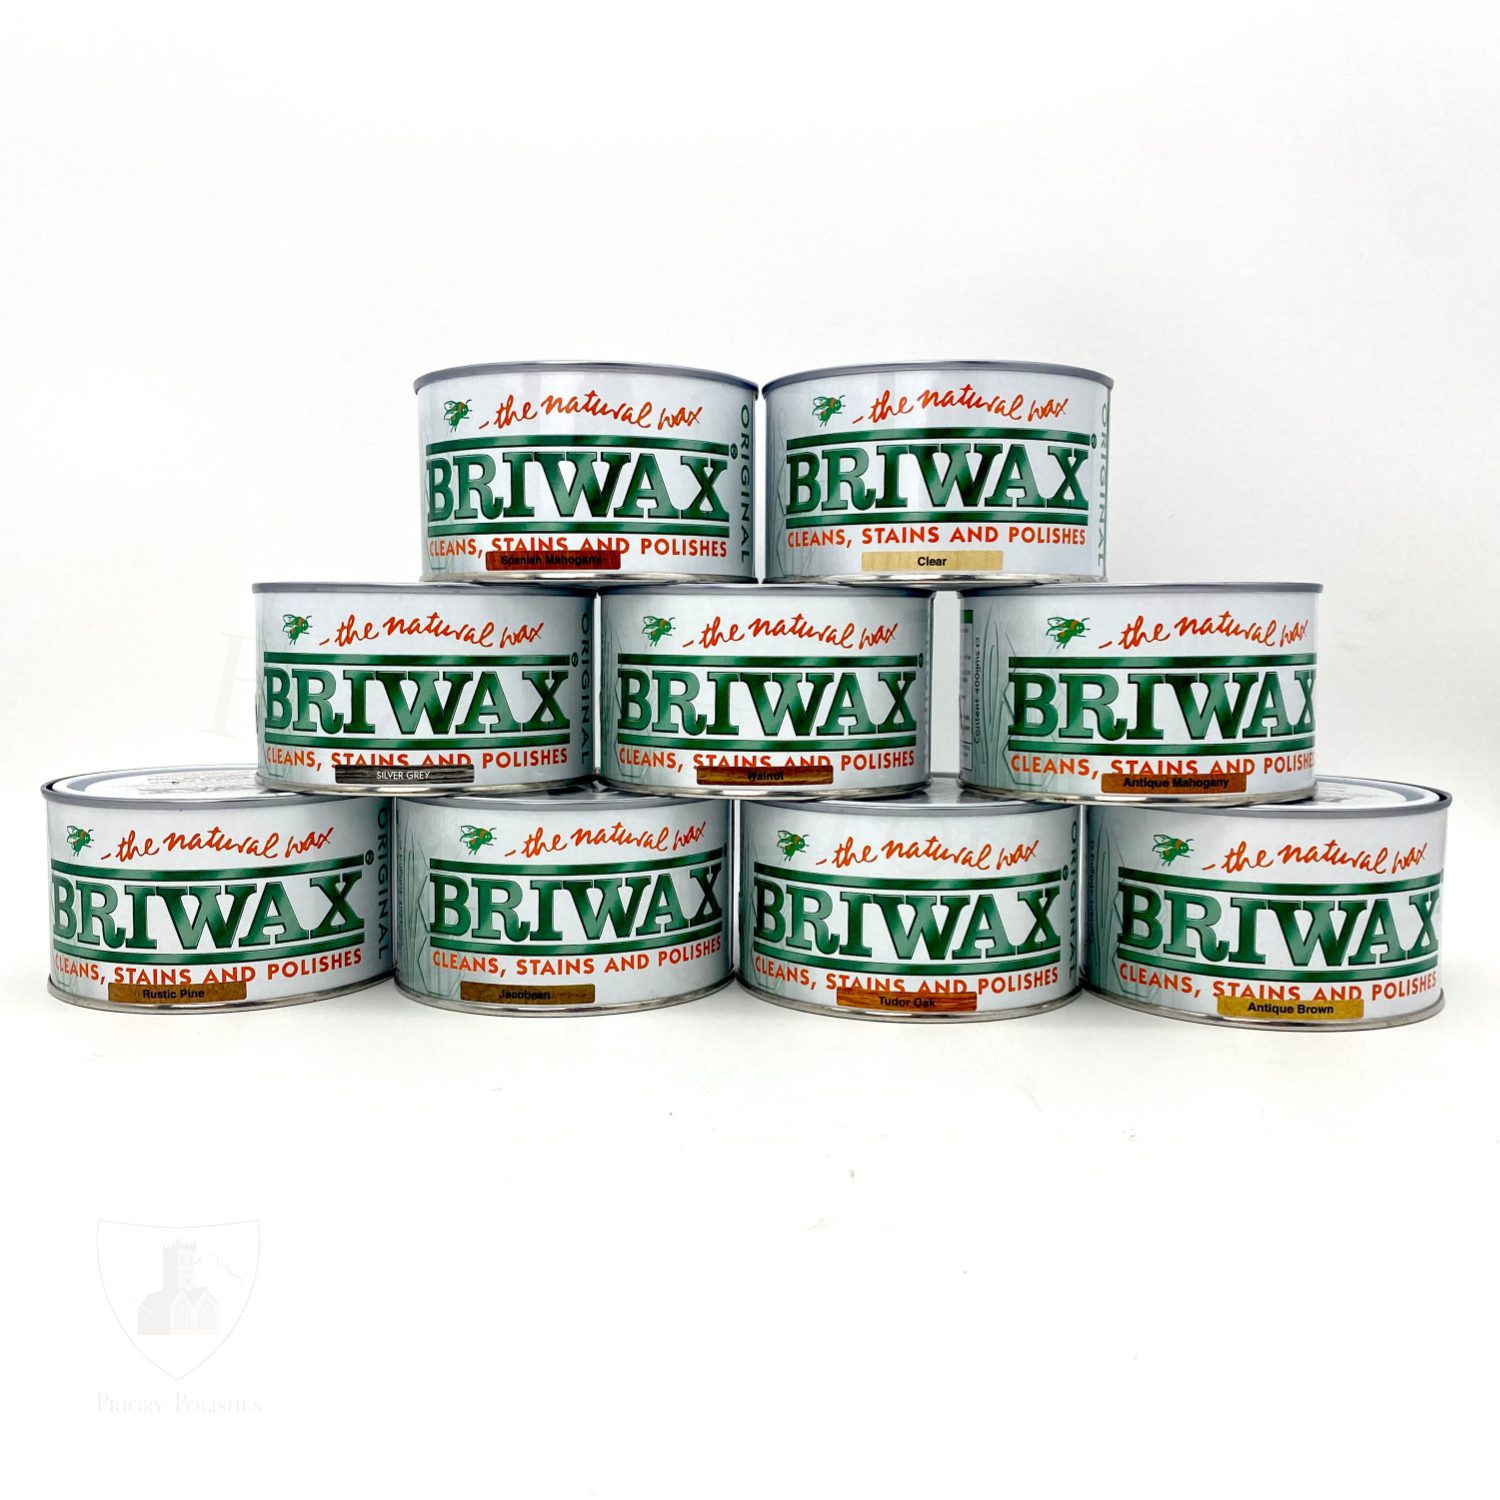  Customer reviews: Briwax (Tudor Brown) Furniture Wax Polish,  Cleans, stains, and polishes